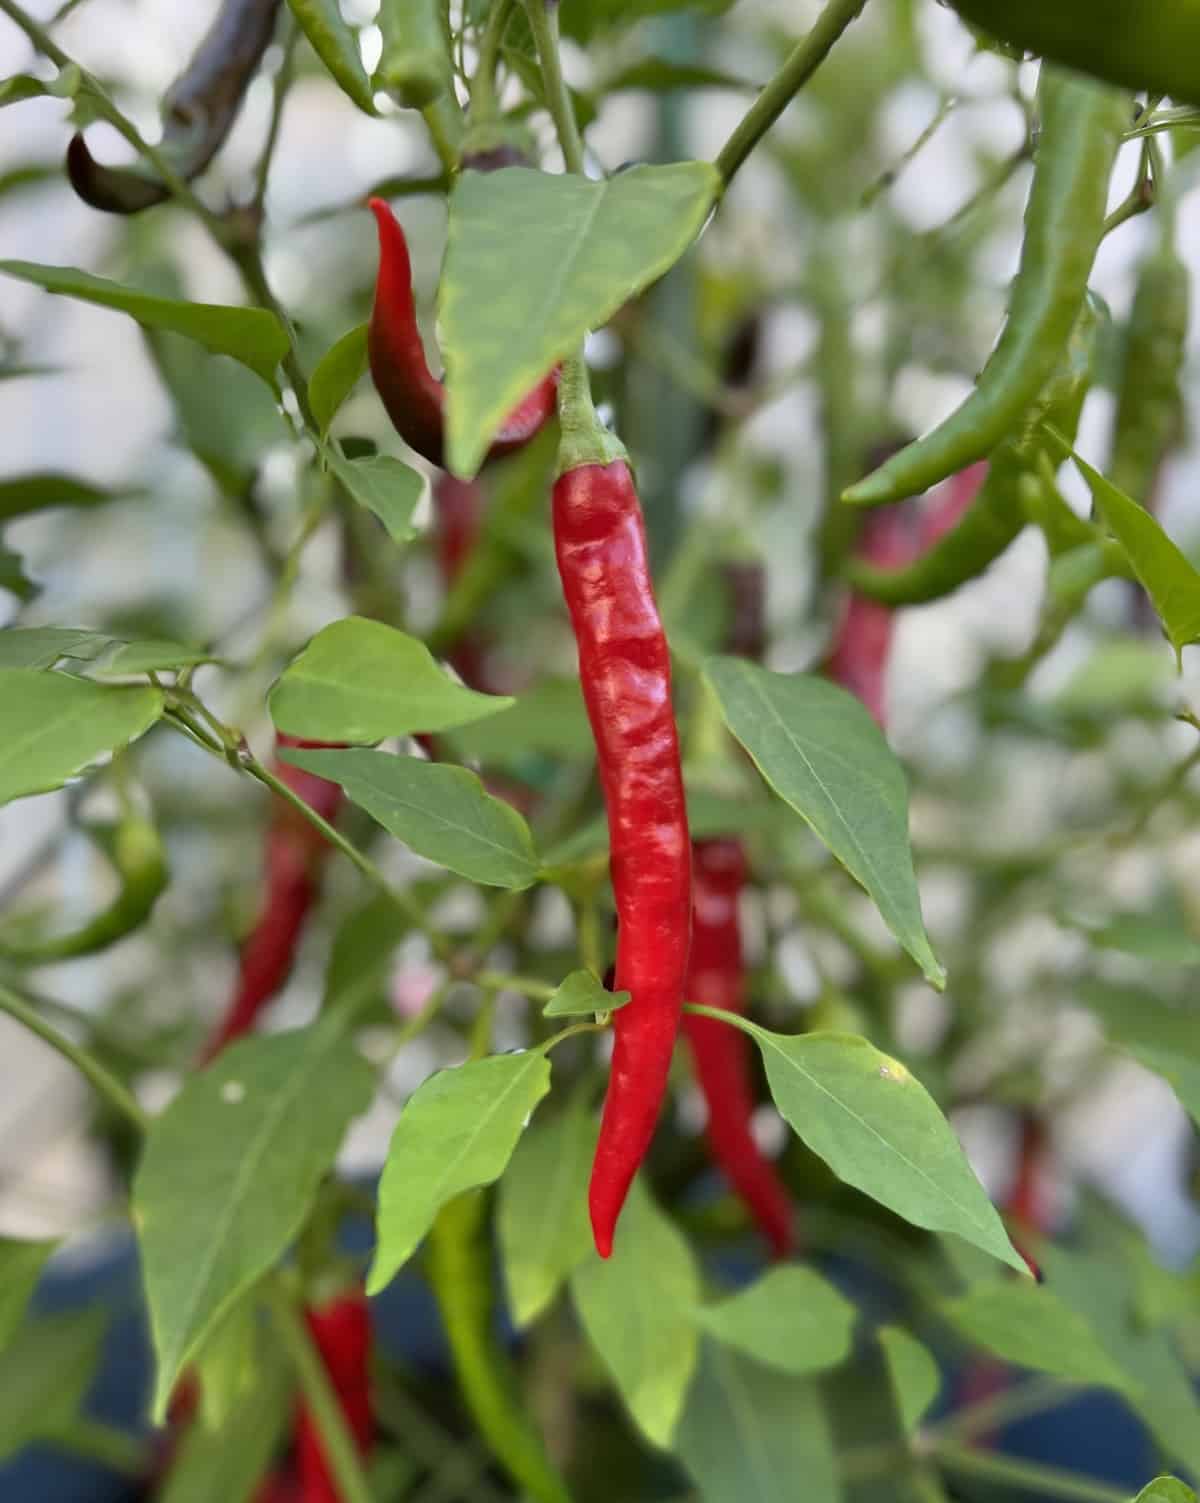 A plant of chile peppers.